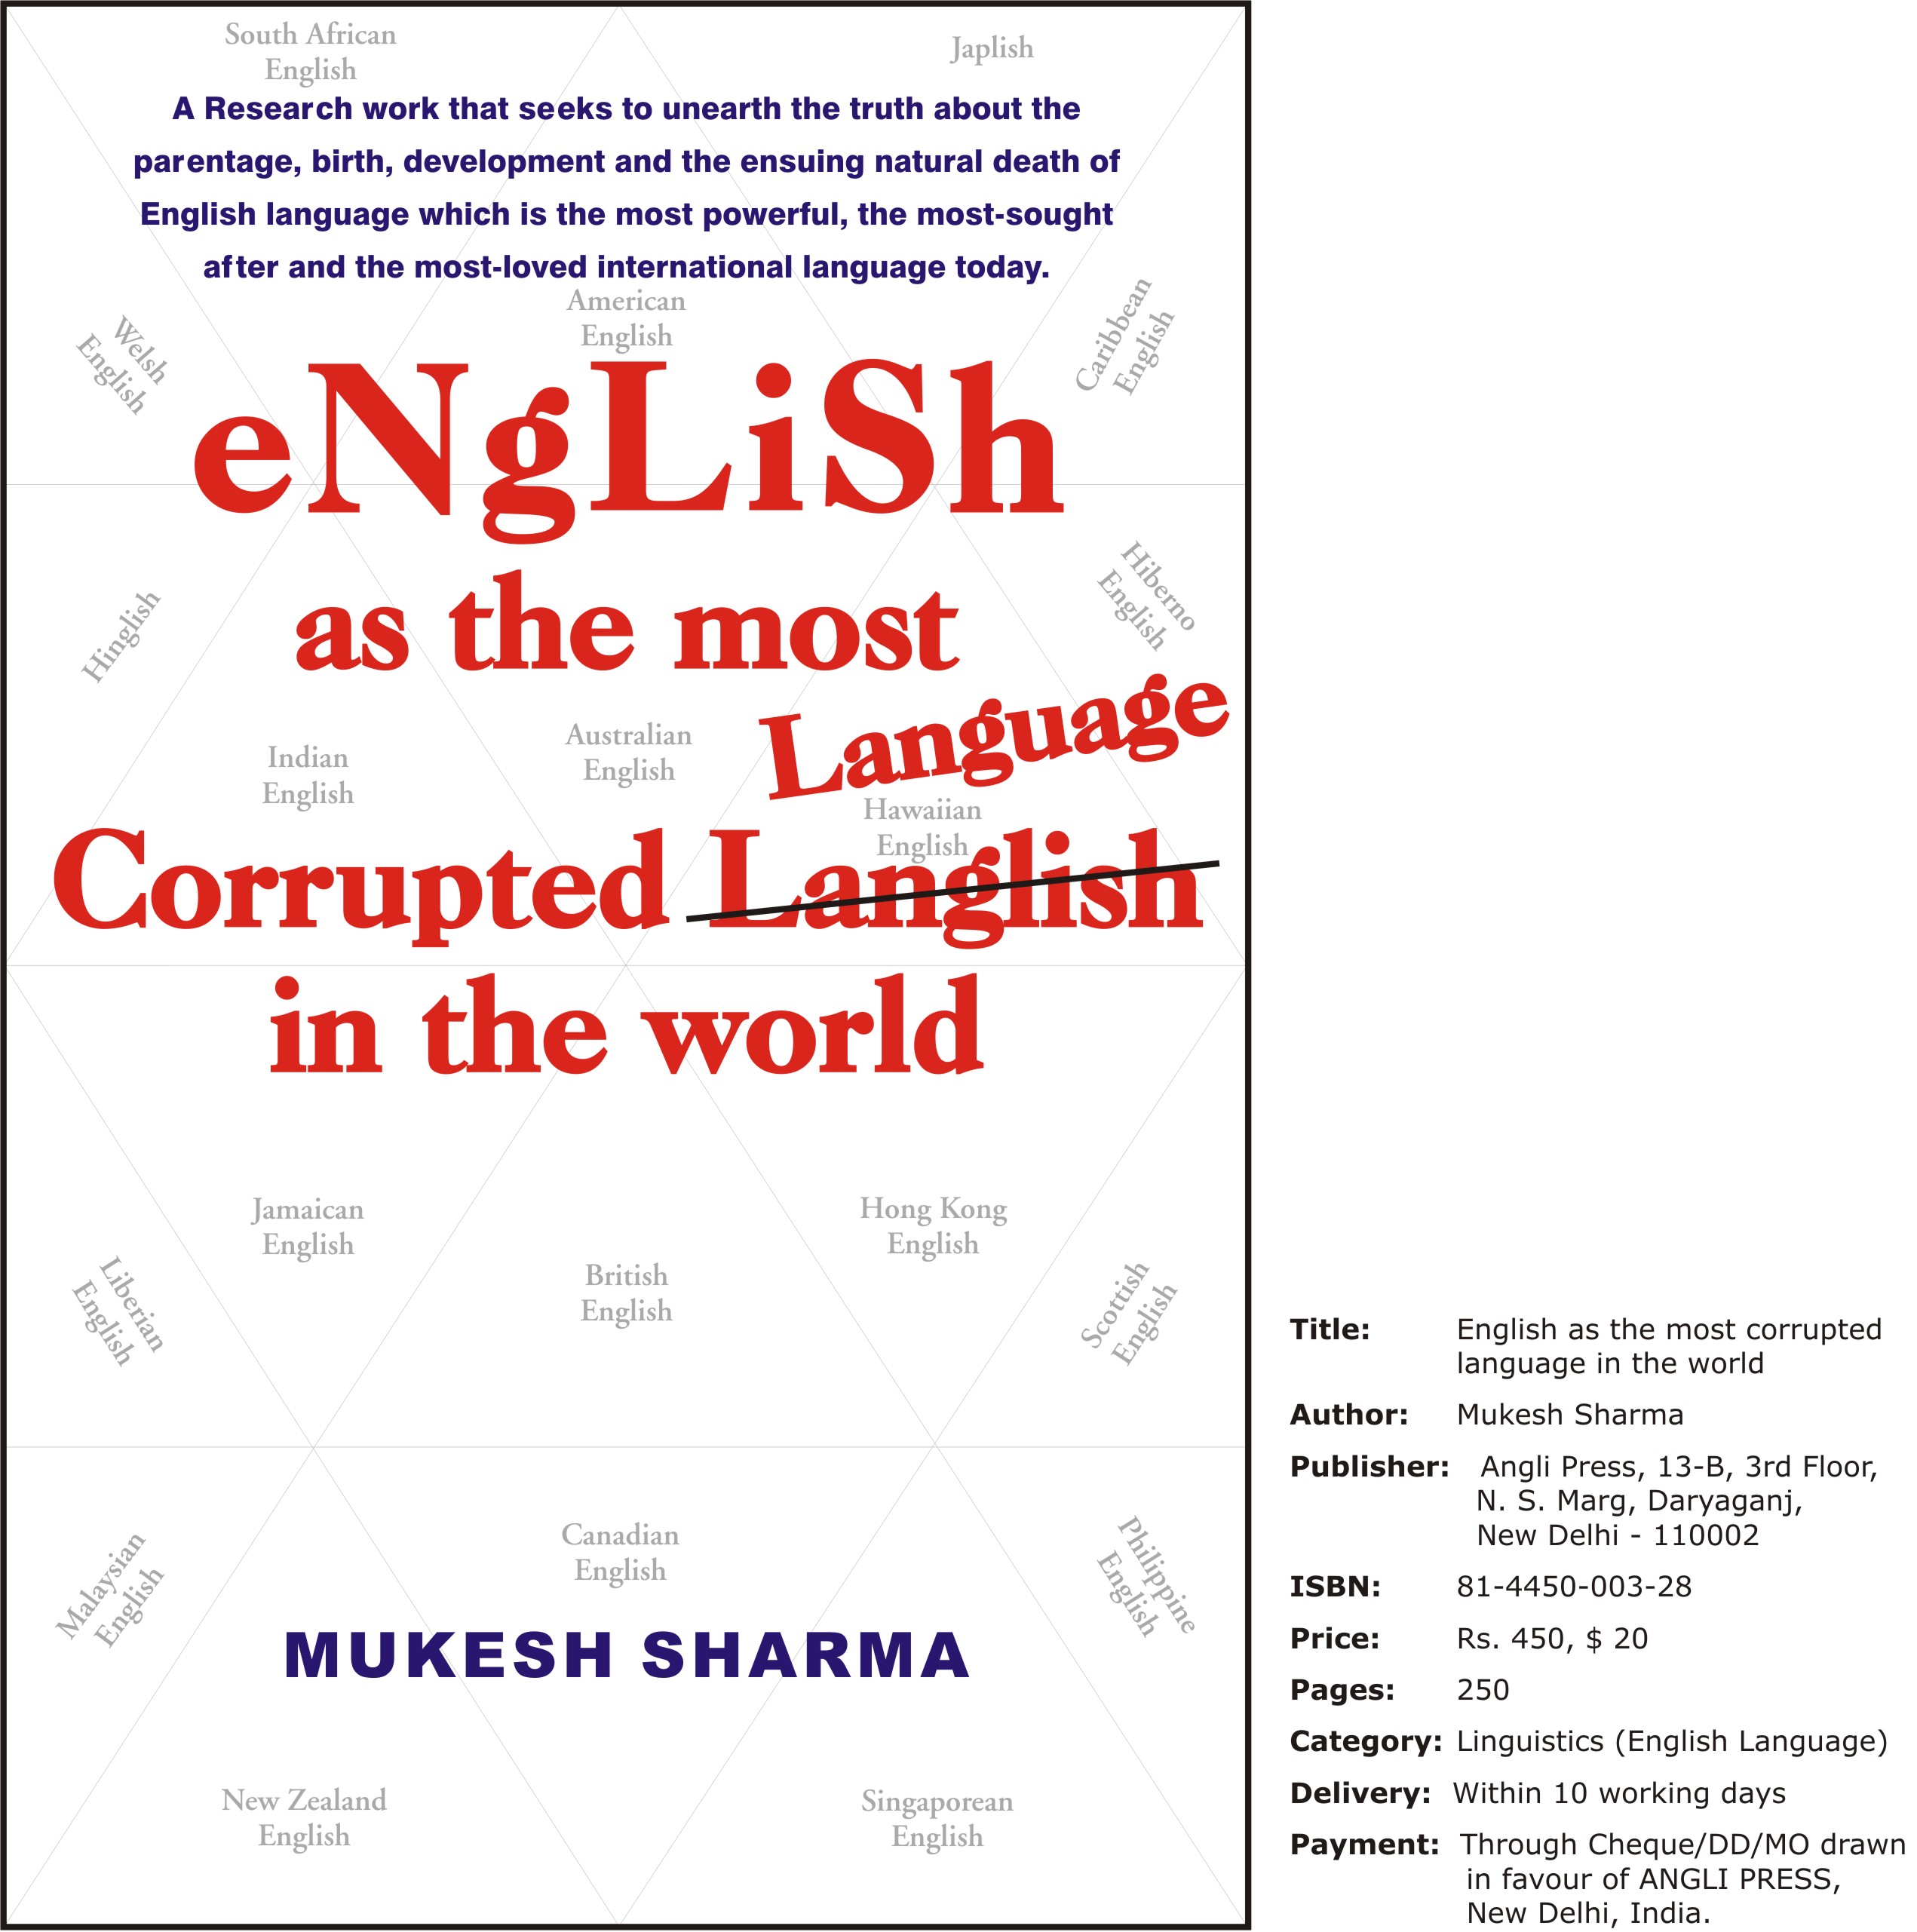 English as the most corrupted language